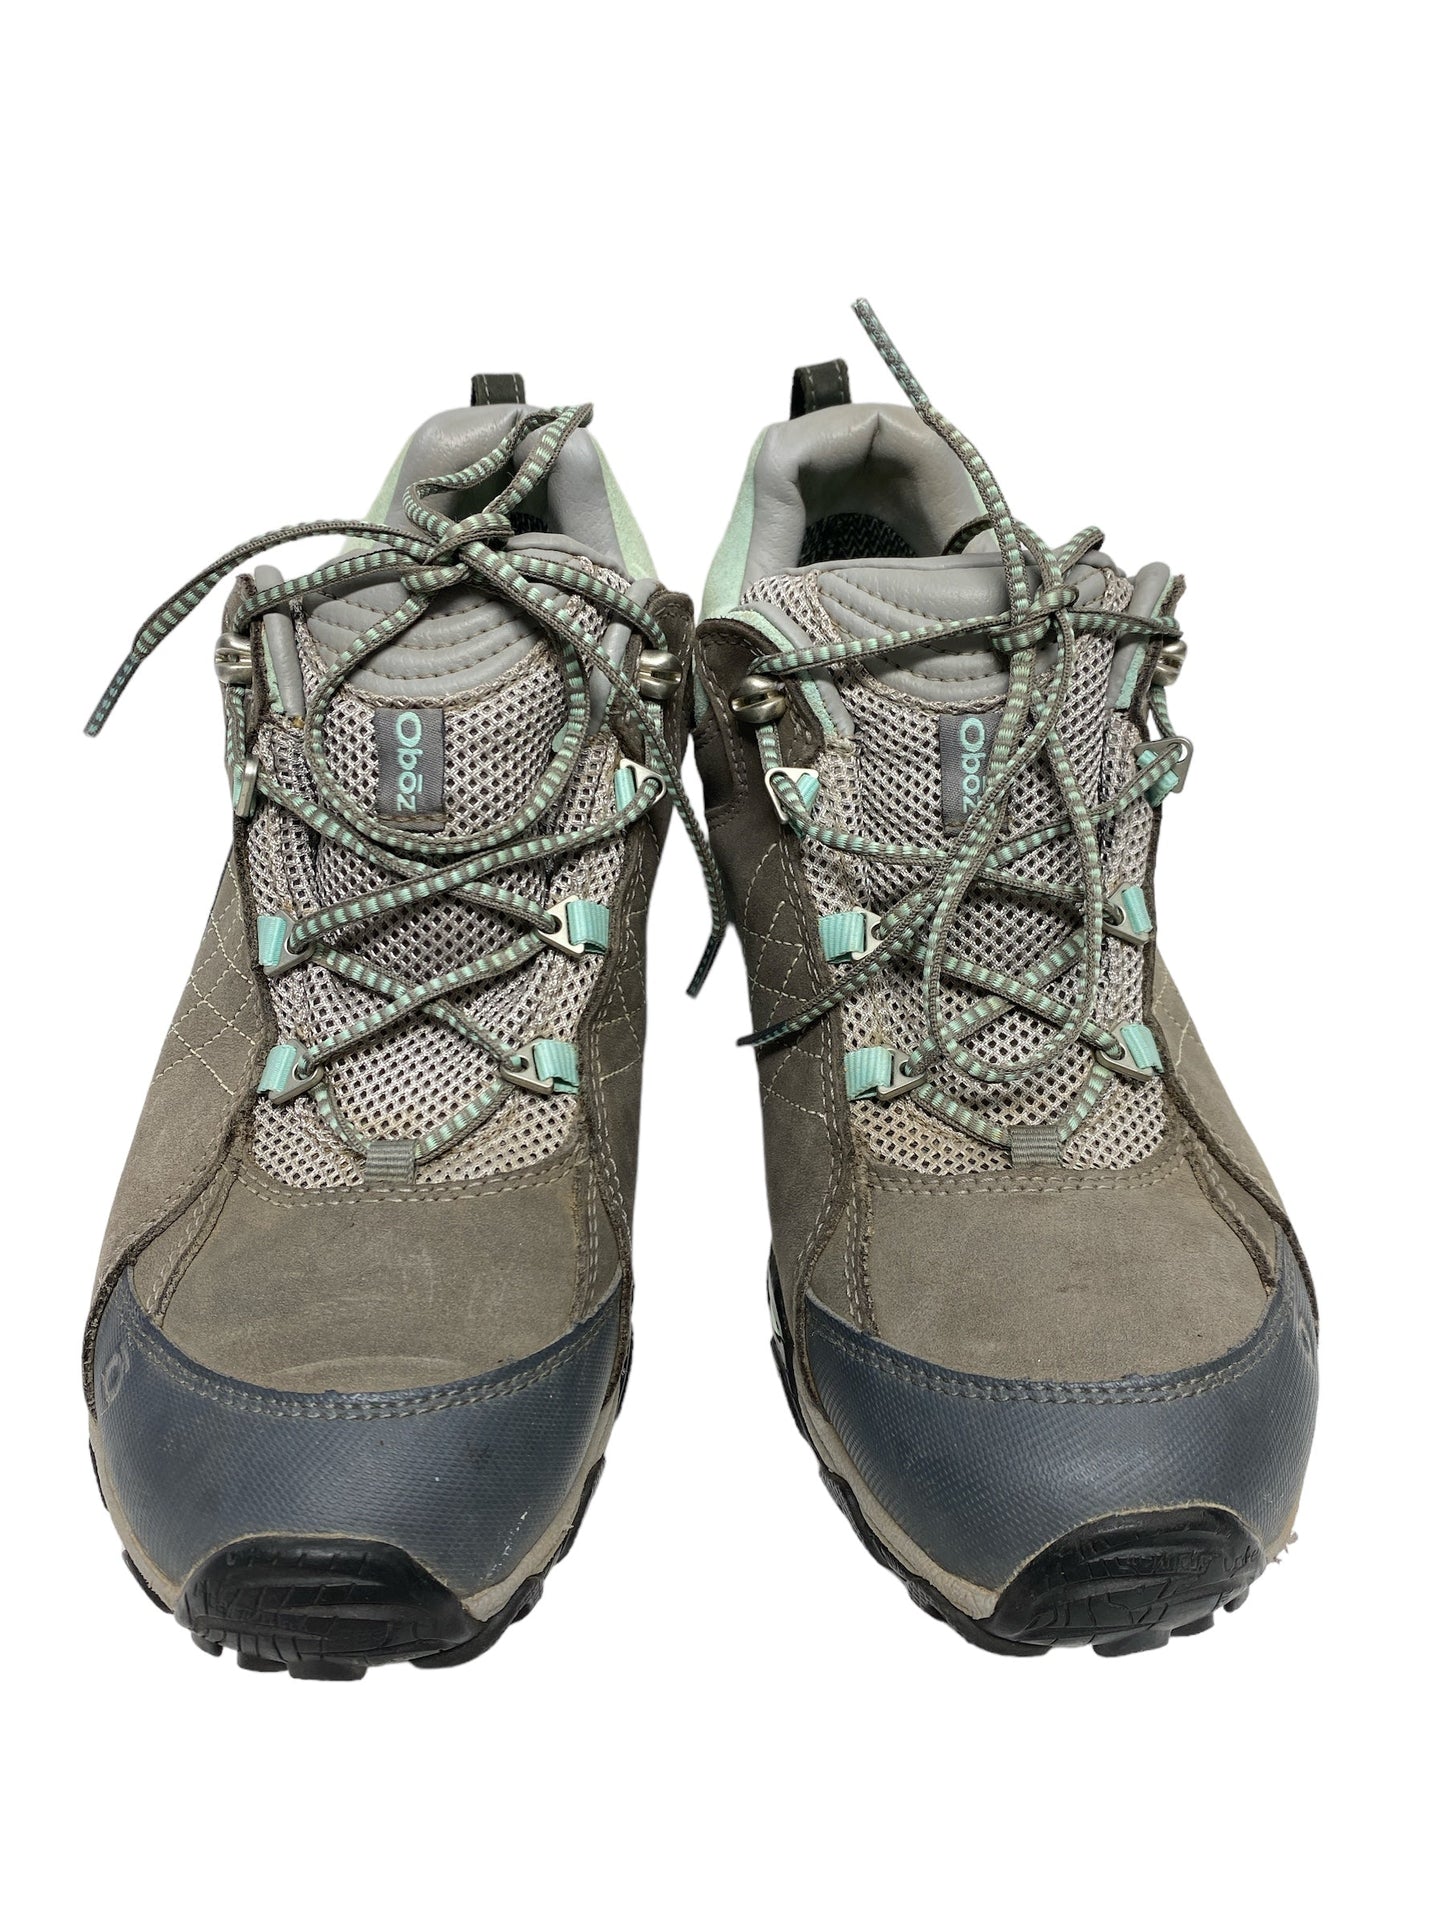 Green & Grey Boots Hiking Cmc, Size 8.5